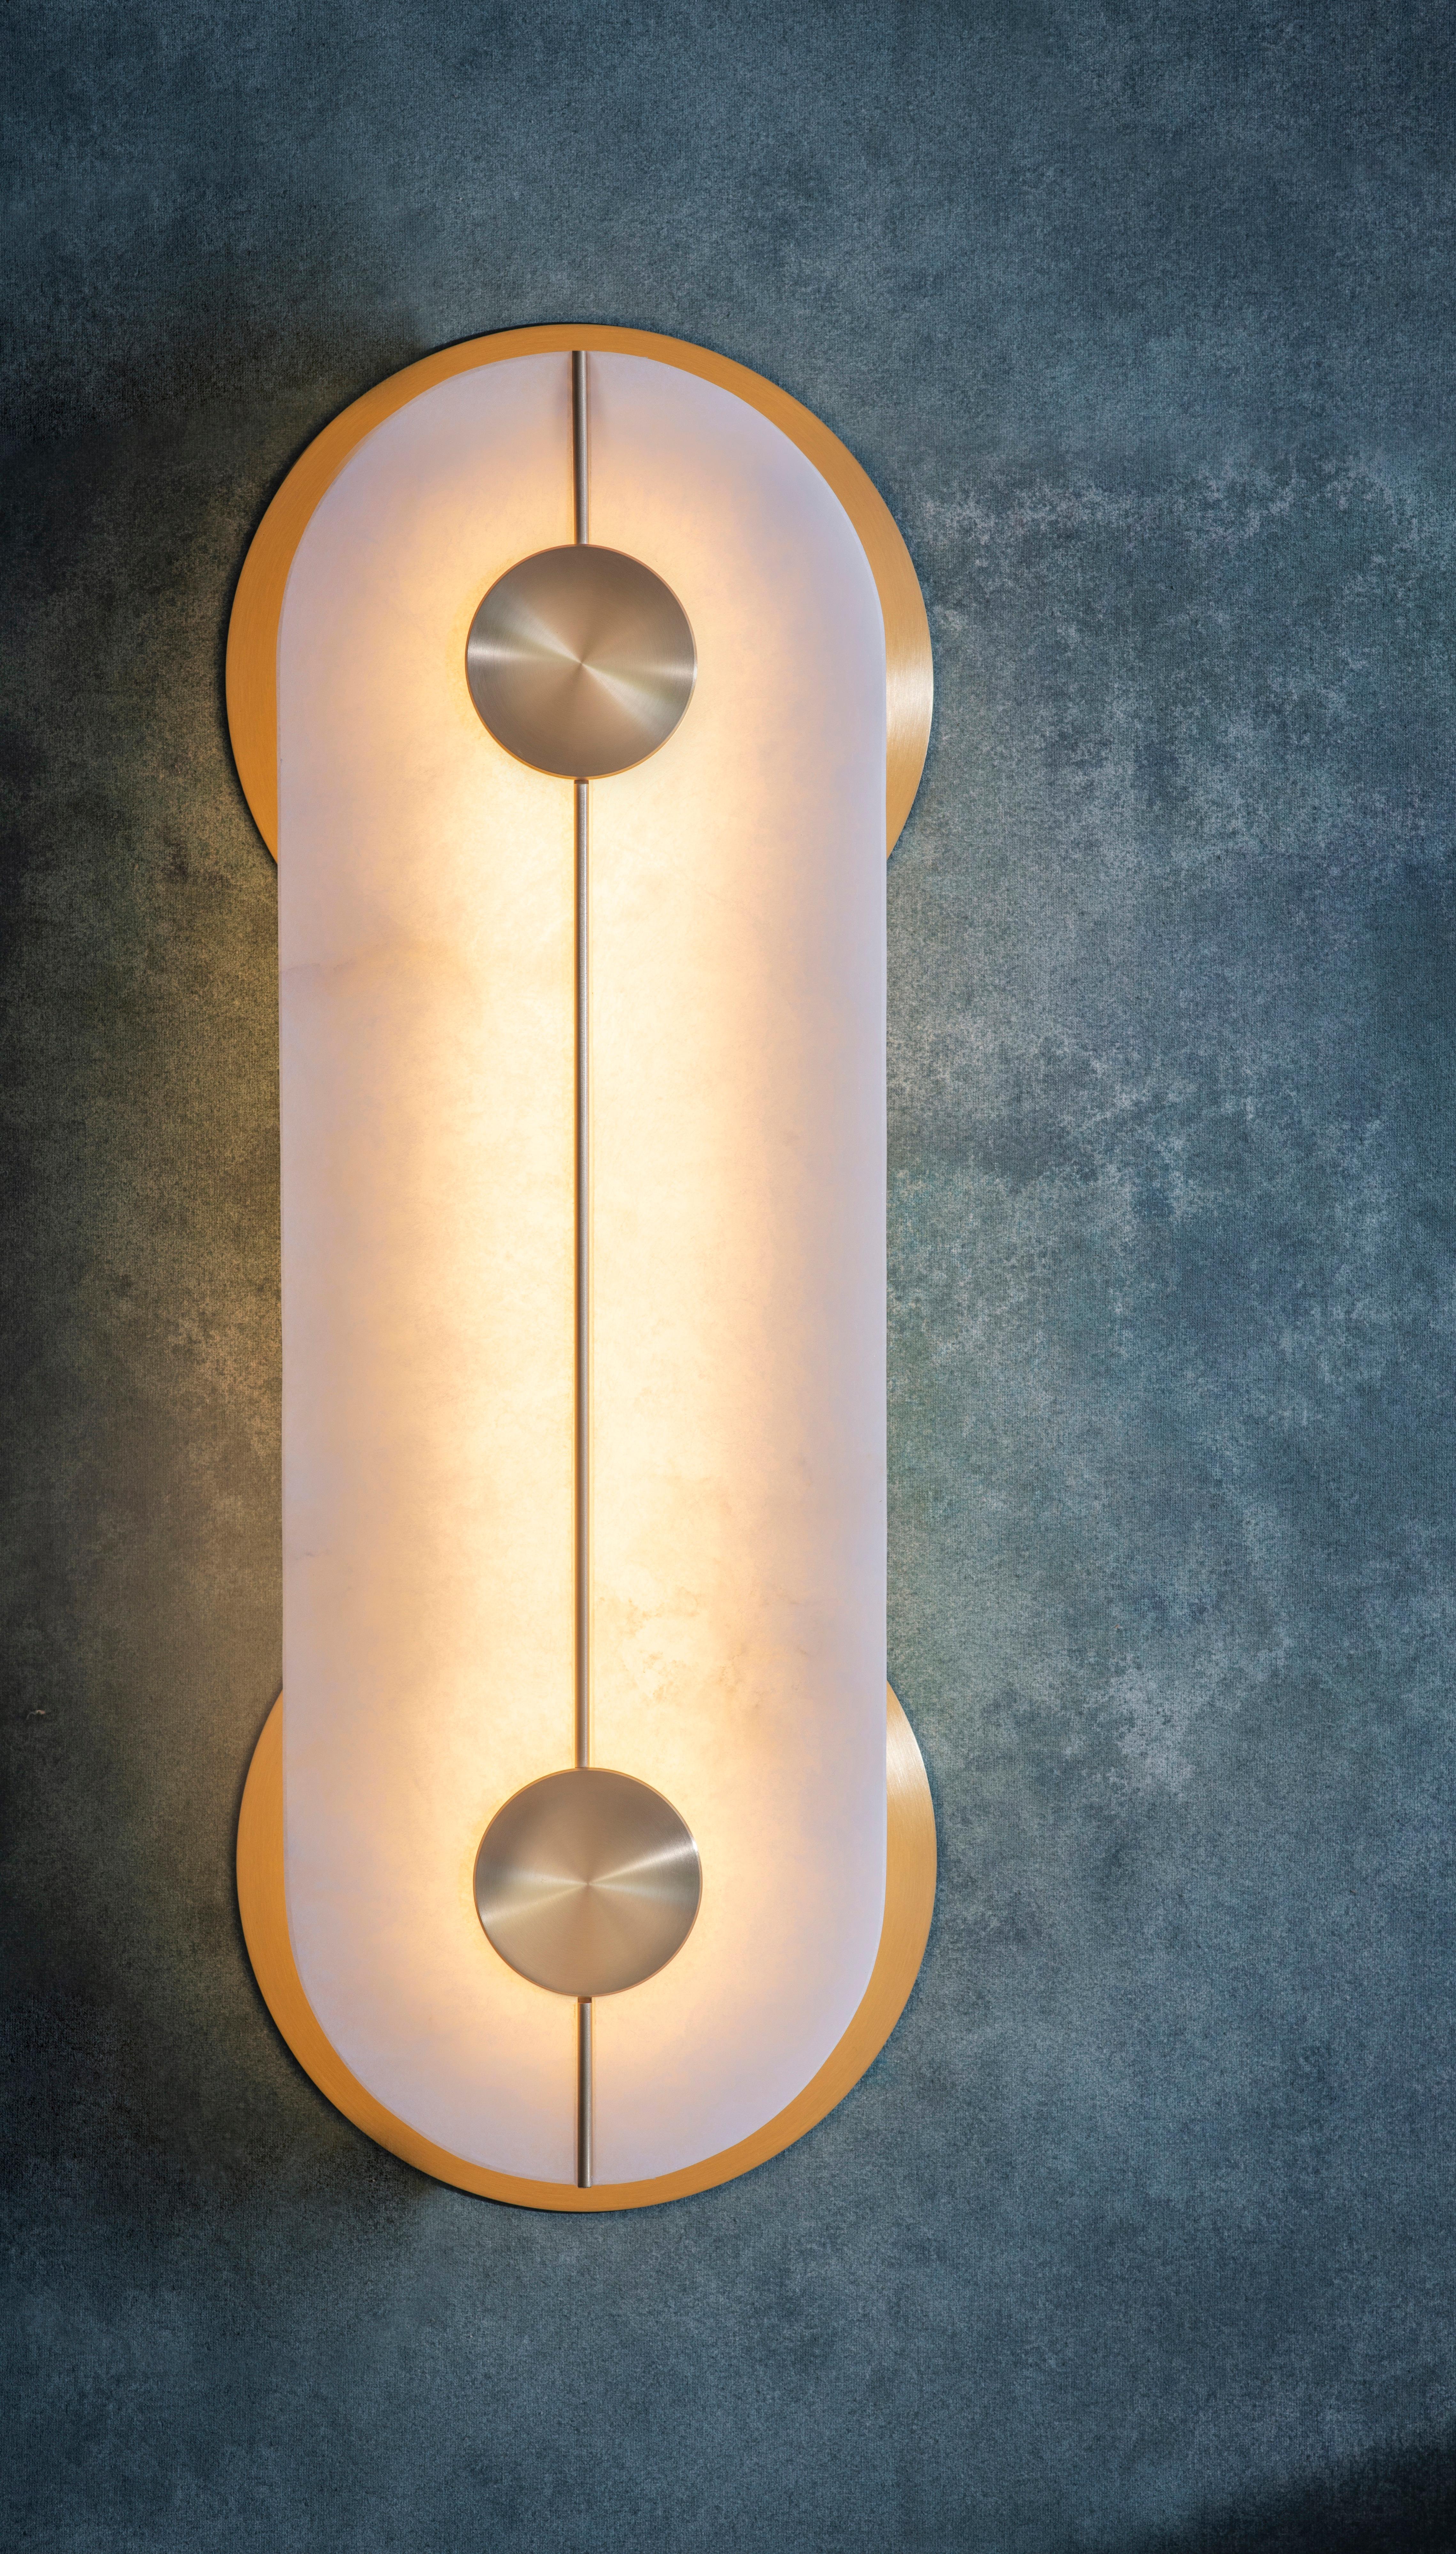 Brace wall light small by Bert Frank
Dimensions: 42.7 x 16 x 6.7 cm
Materials: Brass 

Available in: Nickel

All our lamps can be wired according to each country. If sold to the USA it will be wired for the USA for instance.

Machined almost